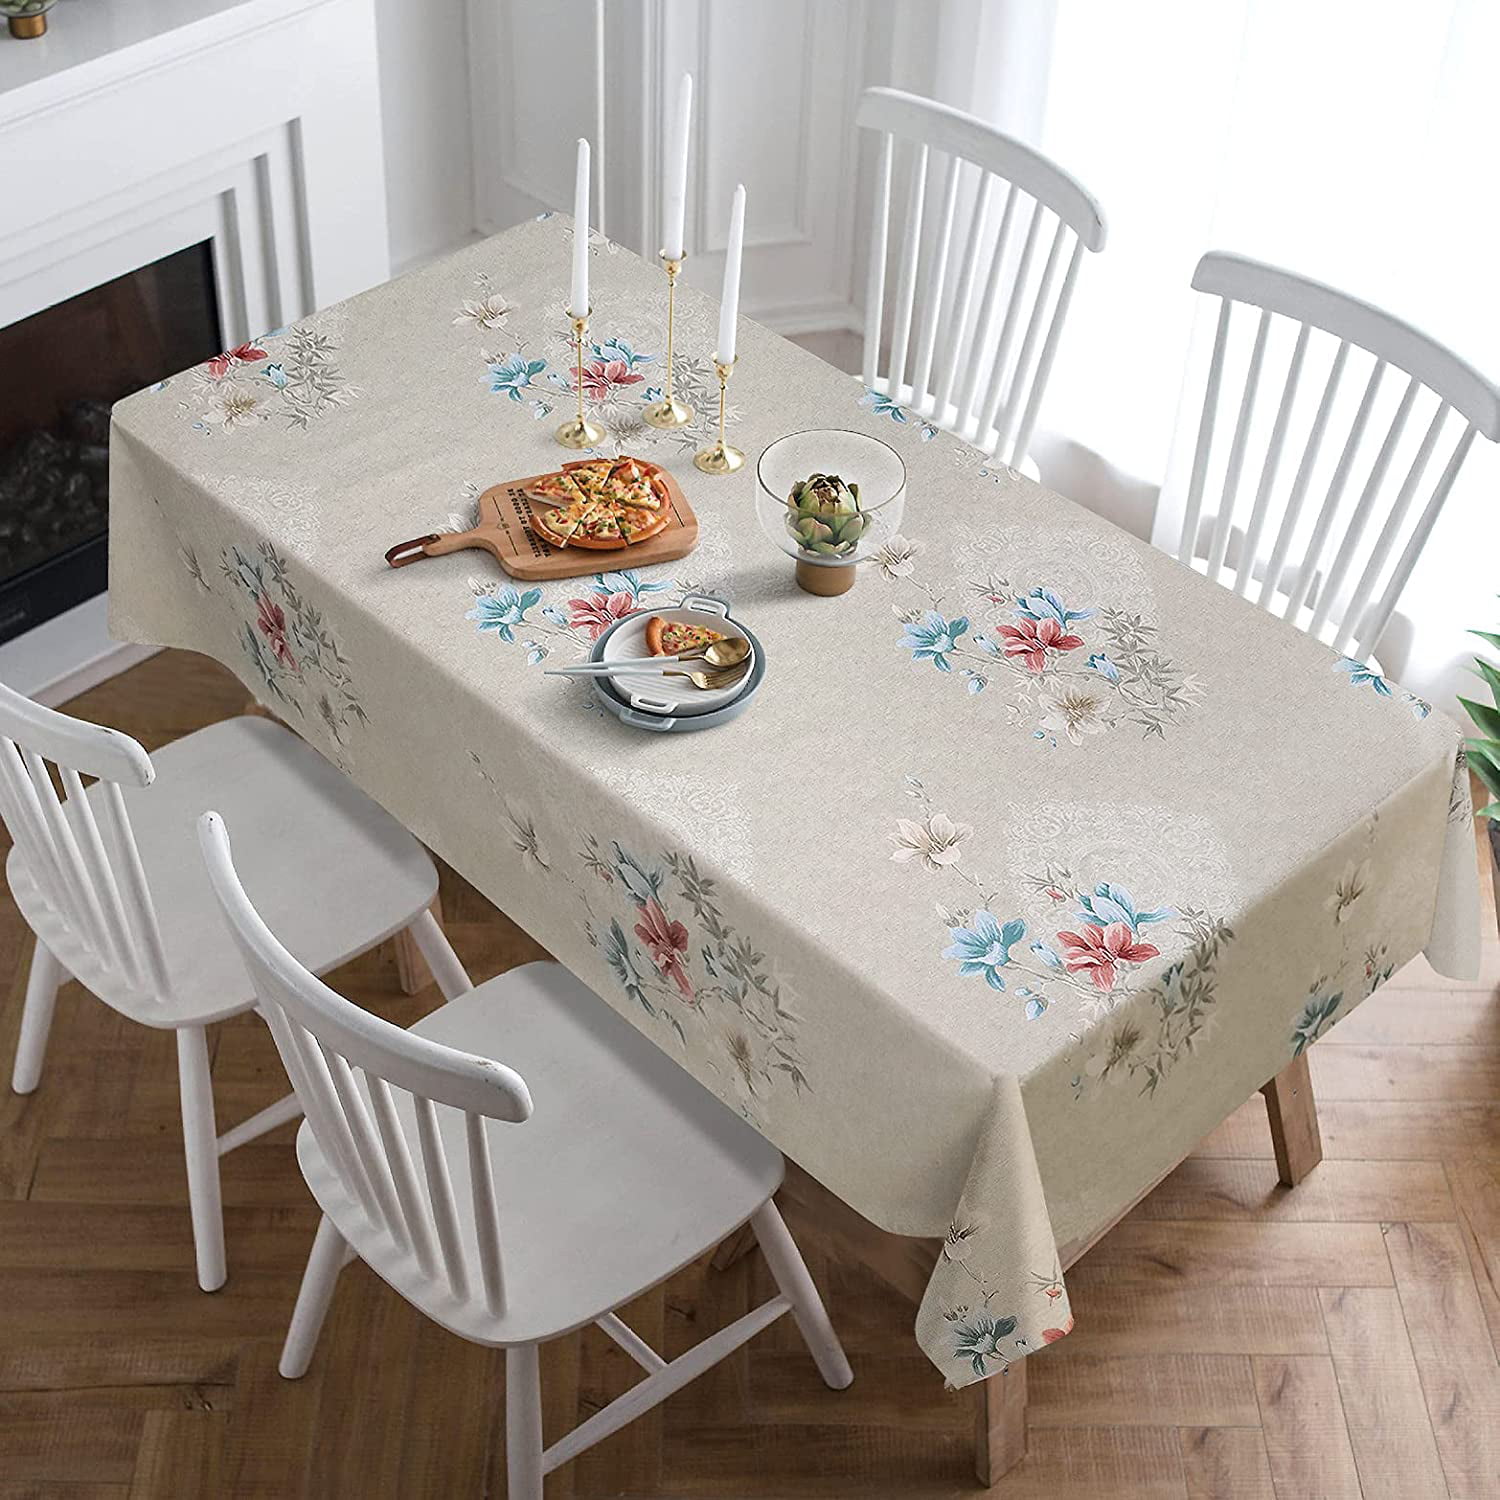 Jixin4you PVC Rectangle Tablecloth 100% Waterproof Spillproof Stain Resistant Wipeable Vinyl Table Cloth for Outdoor Picnic Kitchen Dining 